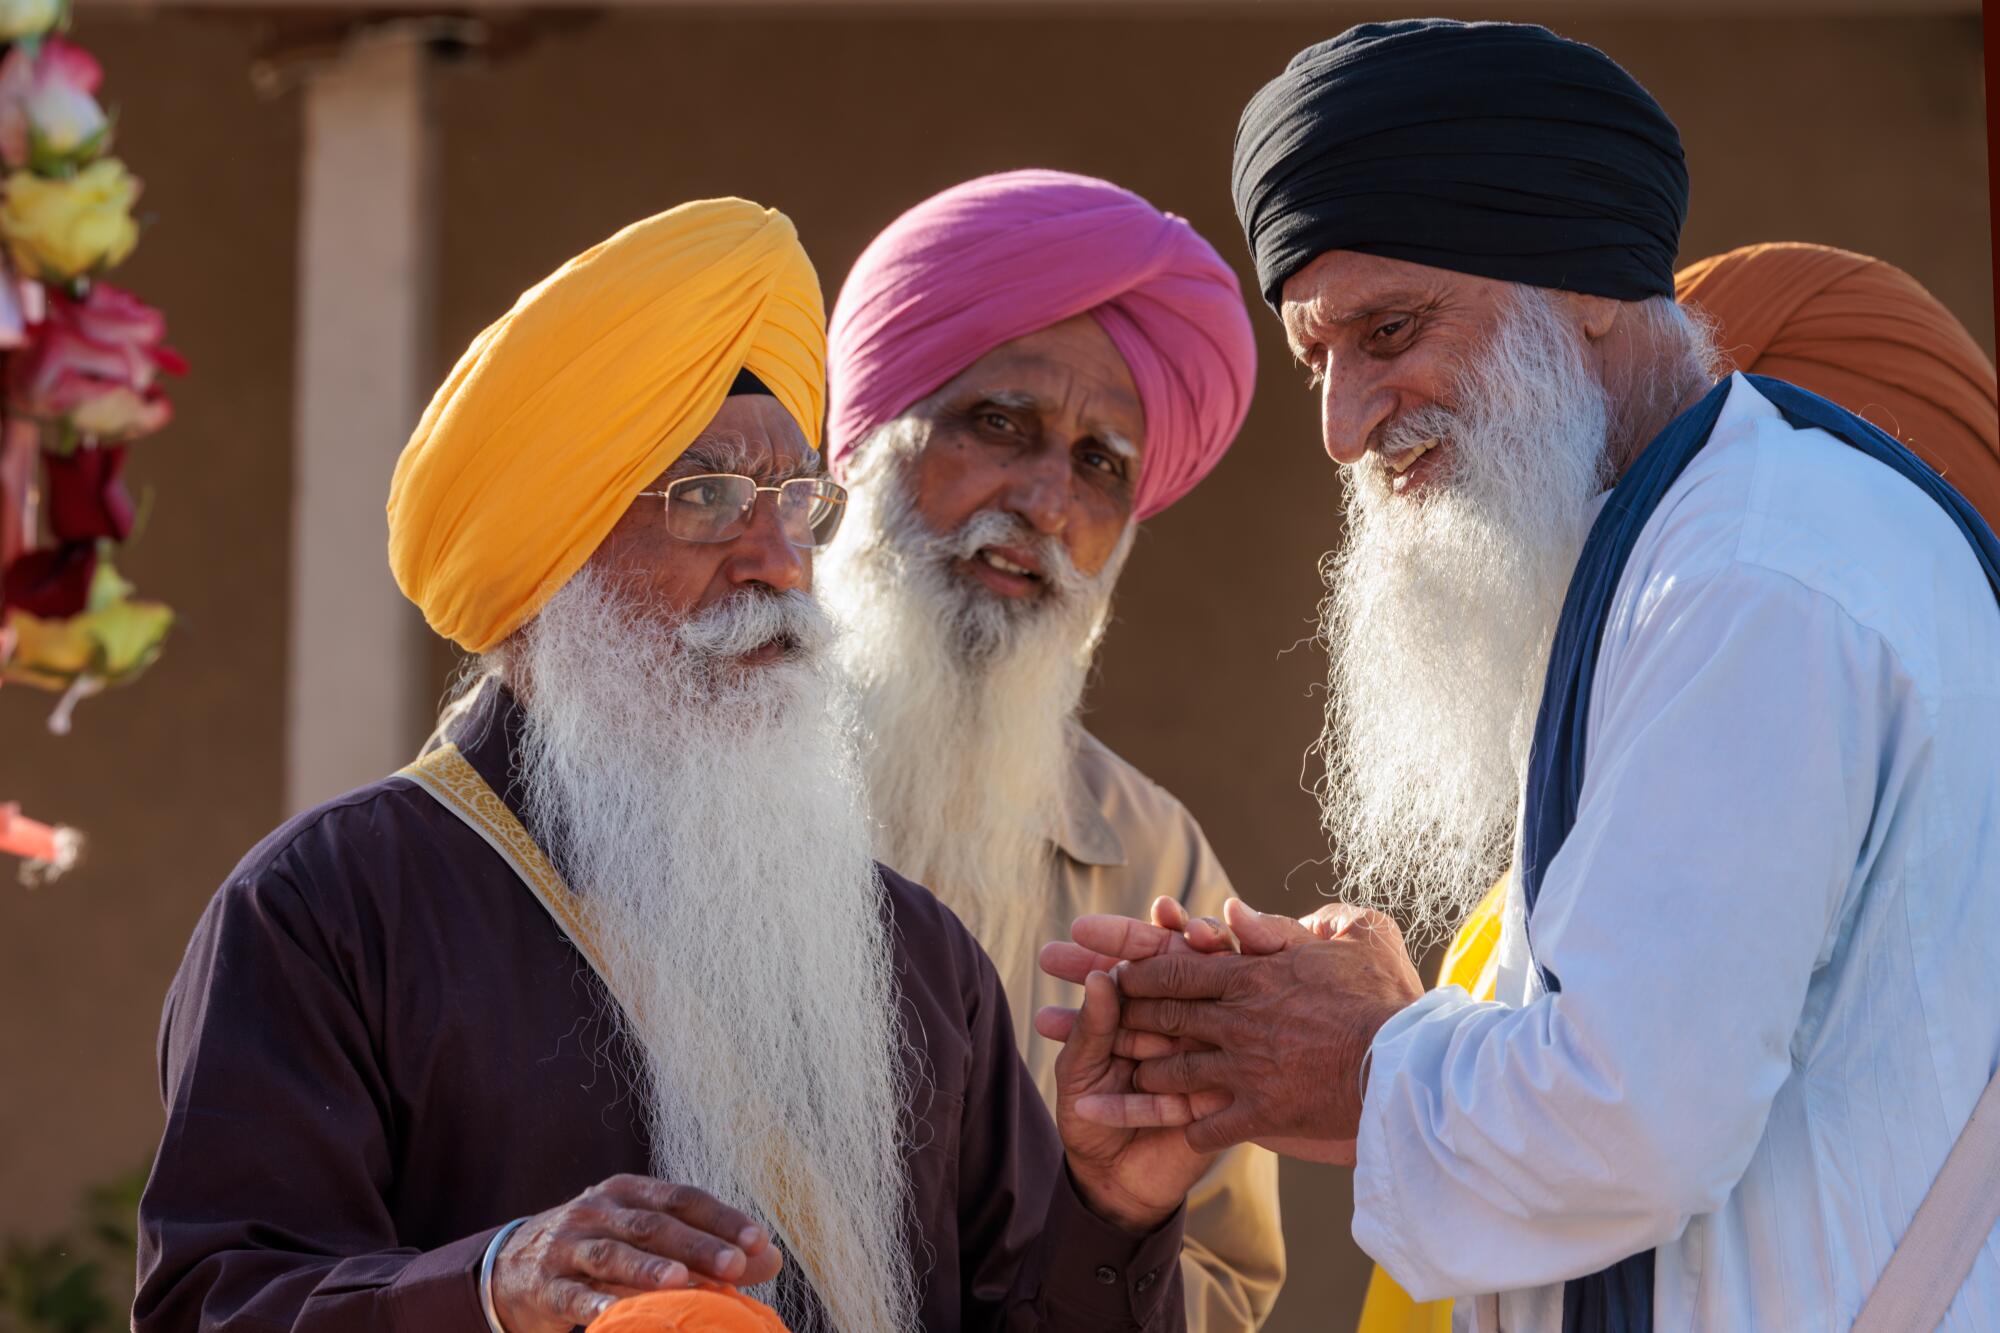 Three men with gray mustaches and beards, wearing orange, pink and black turbans